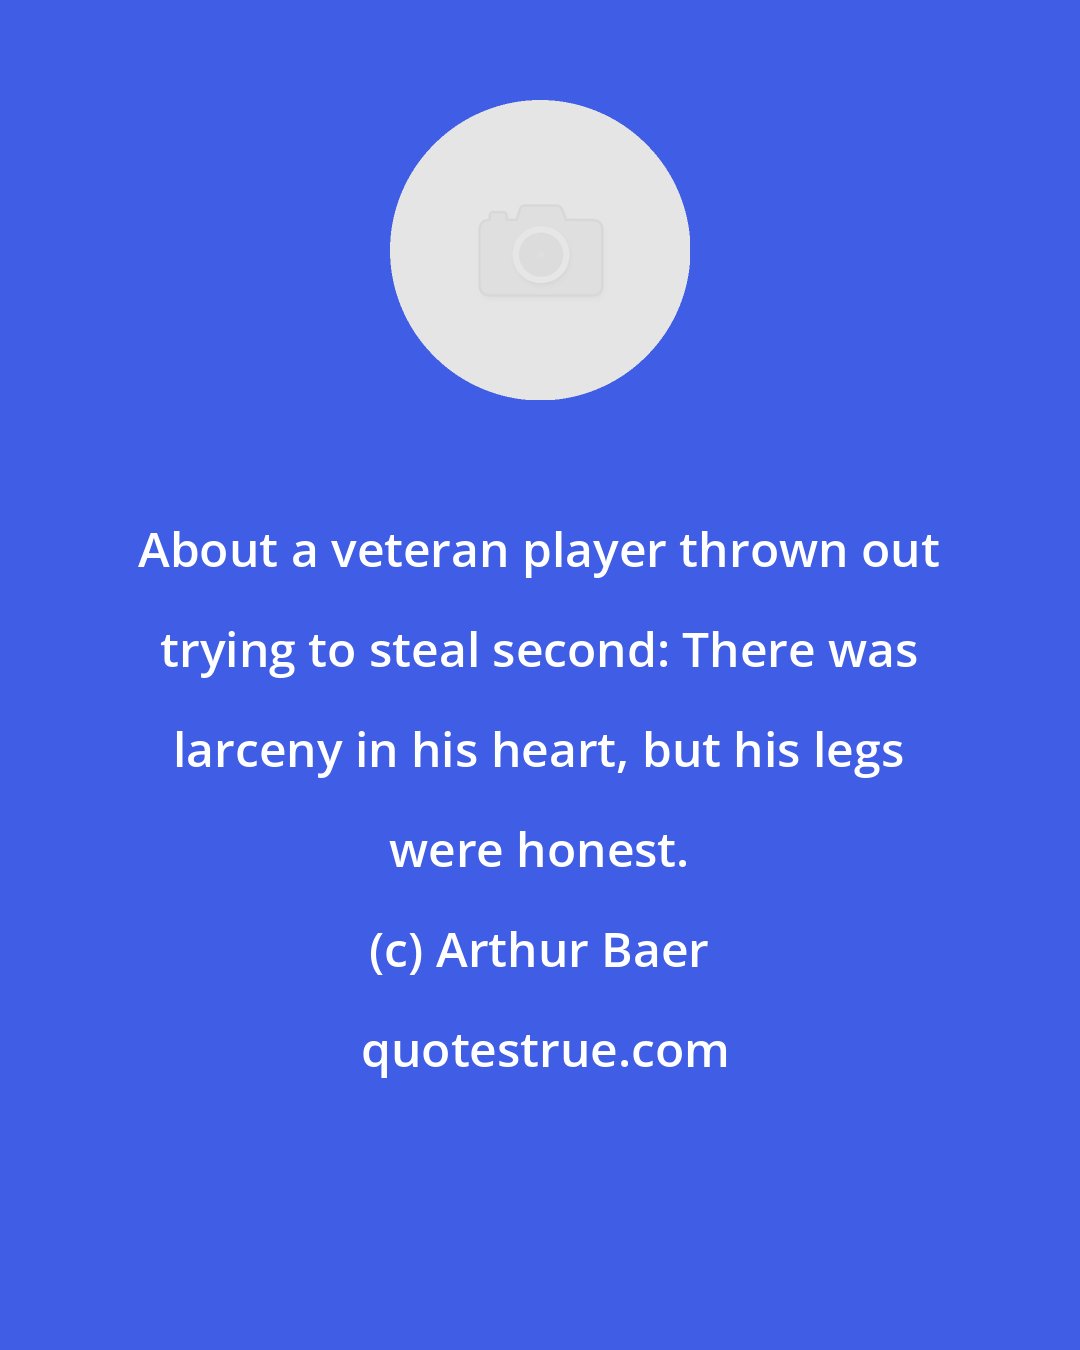 Arthur Baer: About a veteran player thrown out trying to steal second: There was larceny in his heart, but his legs were honest.